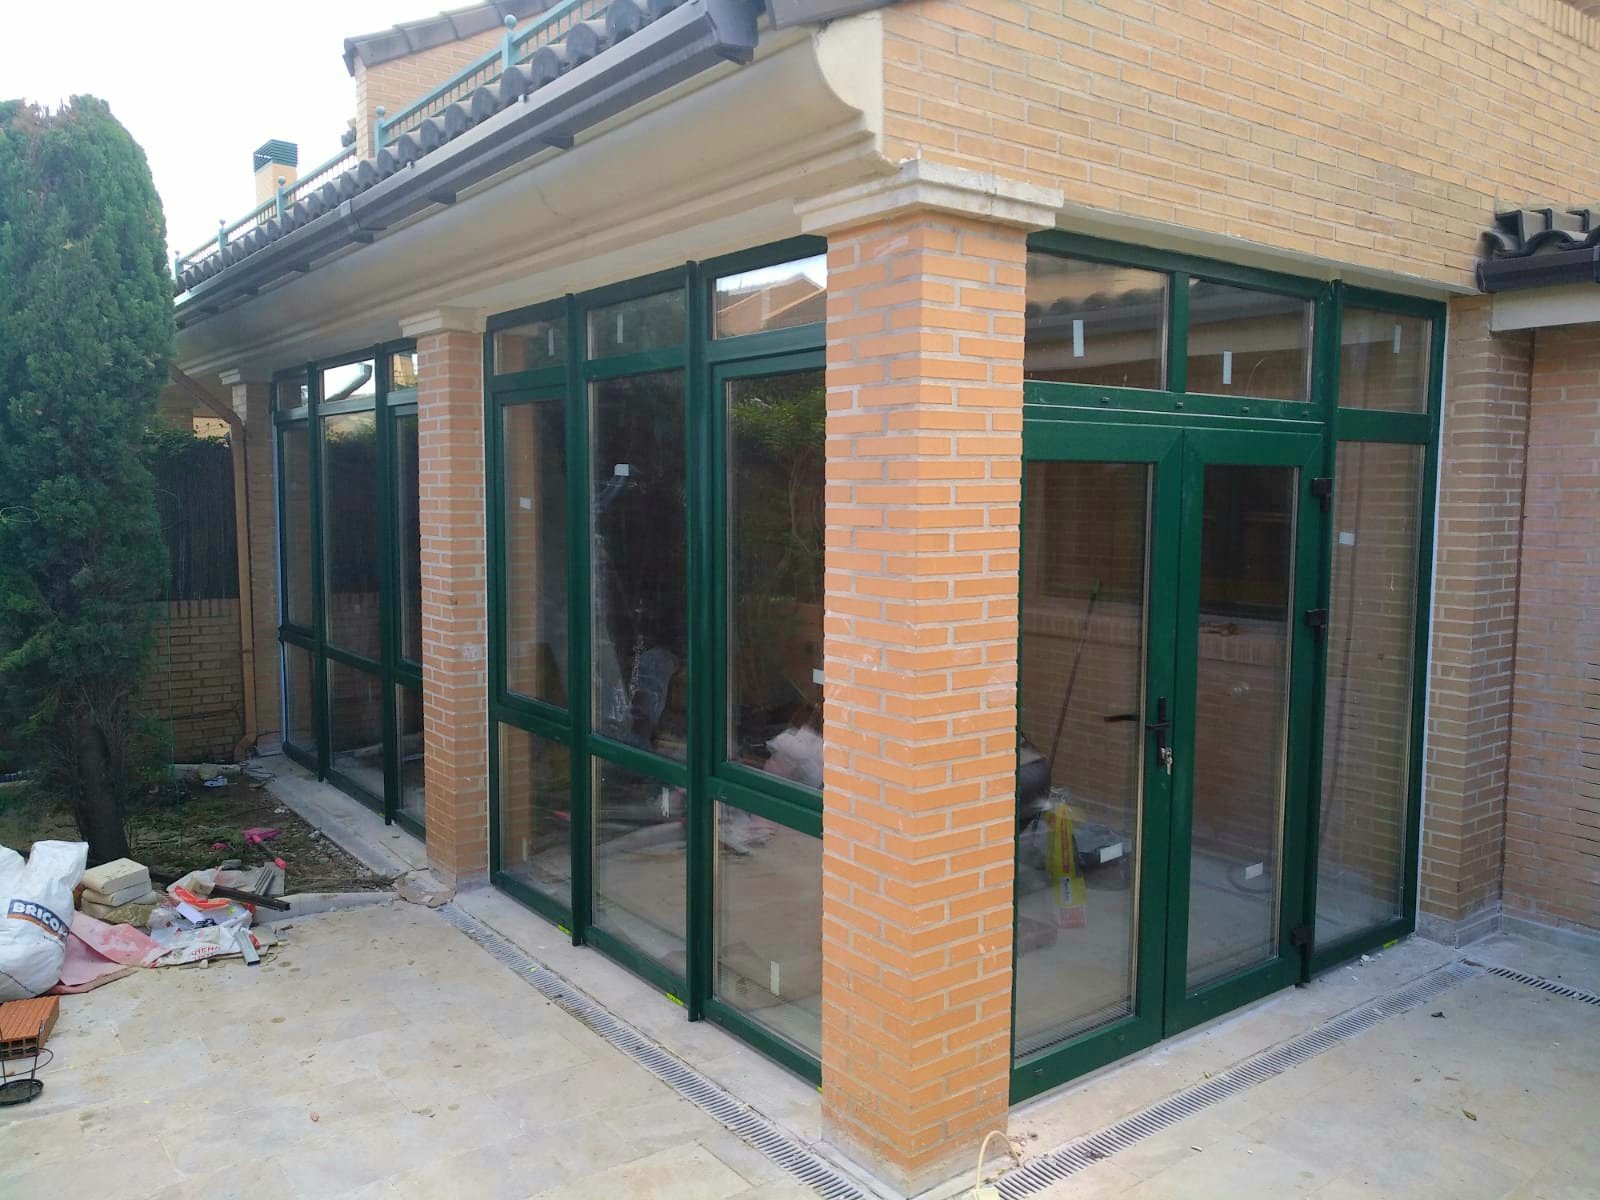 REHAU PVC Tilt-and-Turn Windows and doors installed on the terrace in Valencia color green, mirror glass